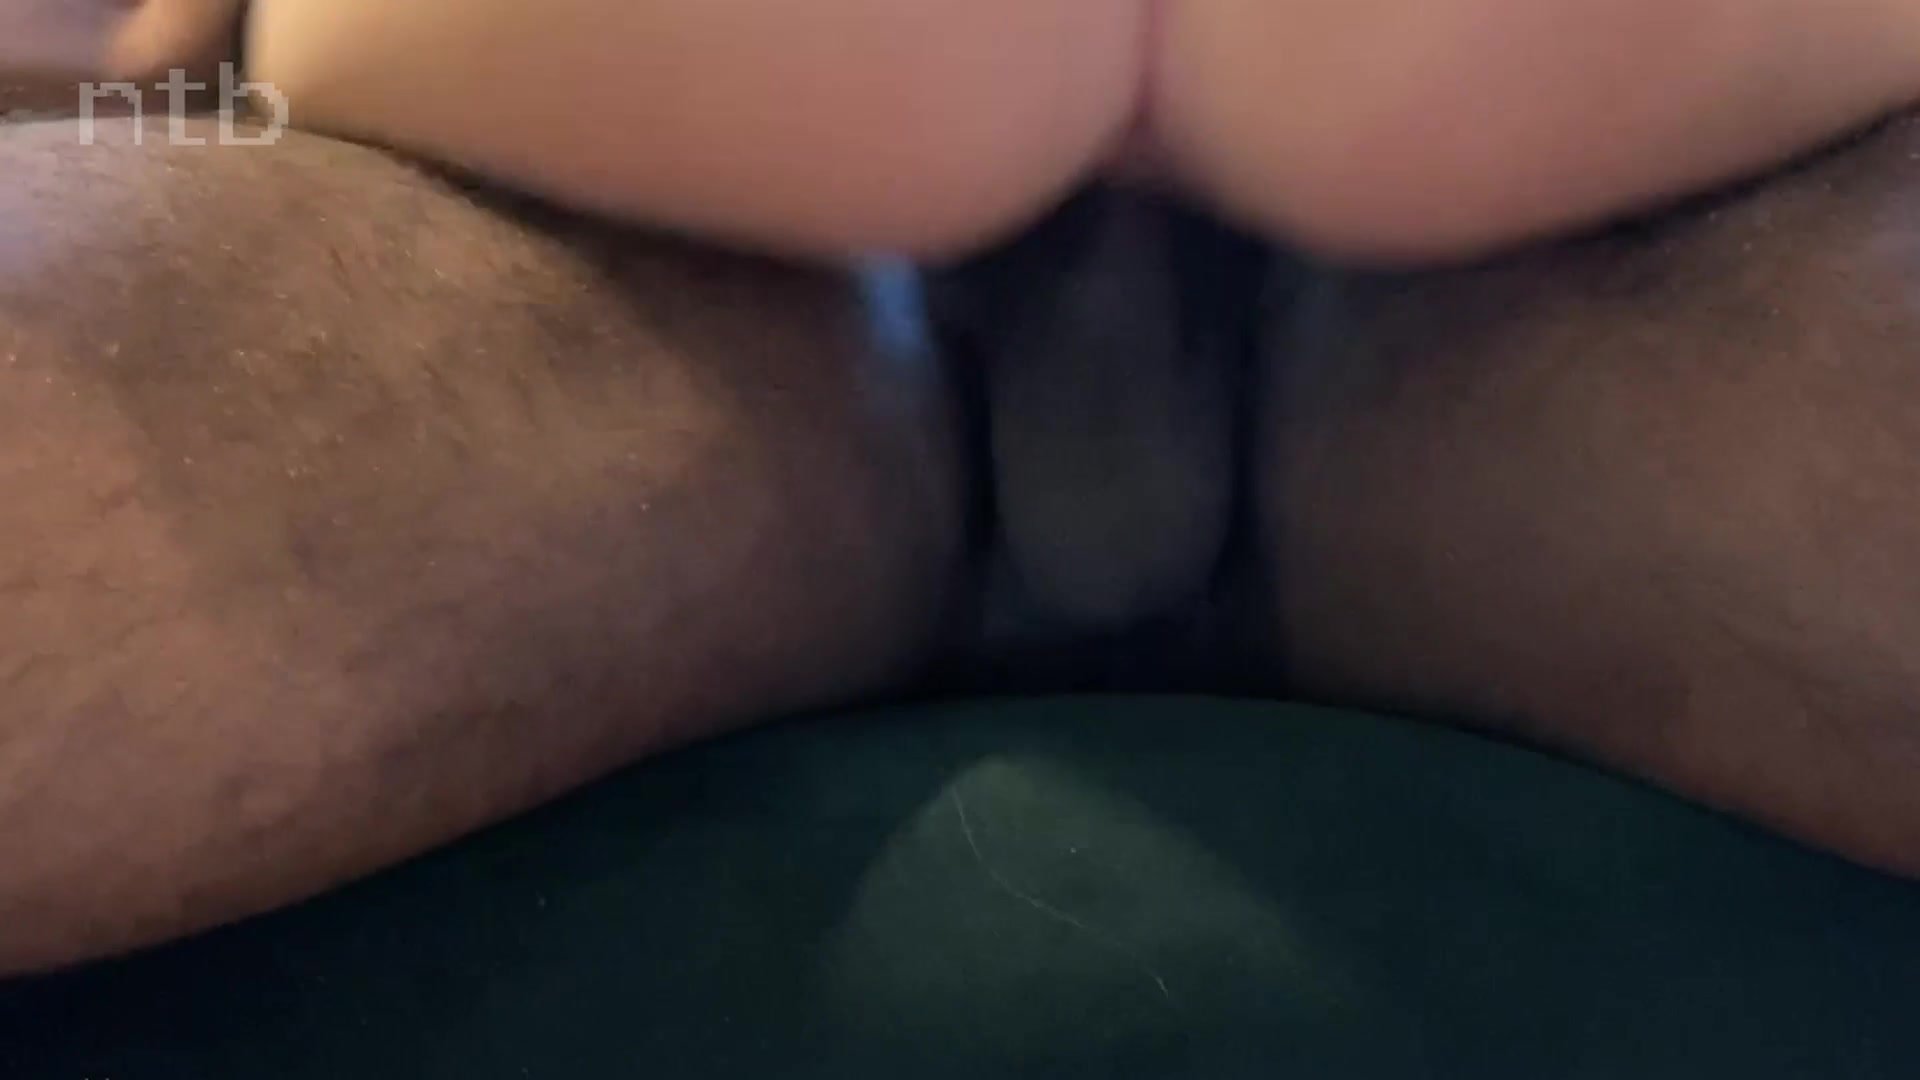 Cuckold blond fucks two endowed black bulls and gets their creampies